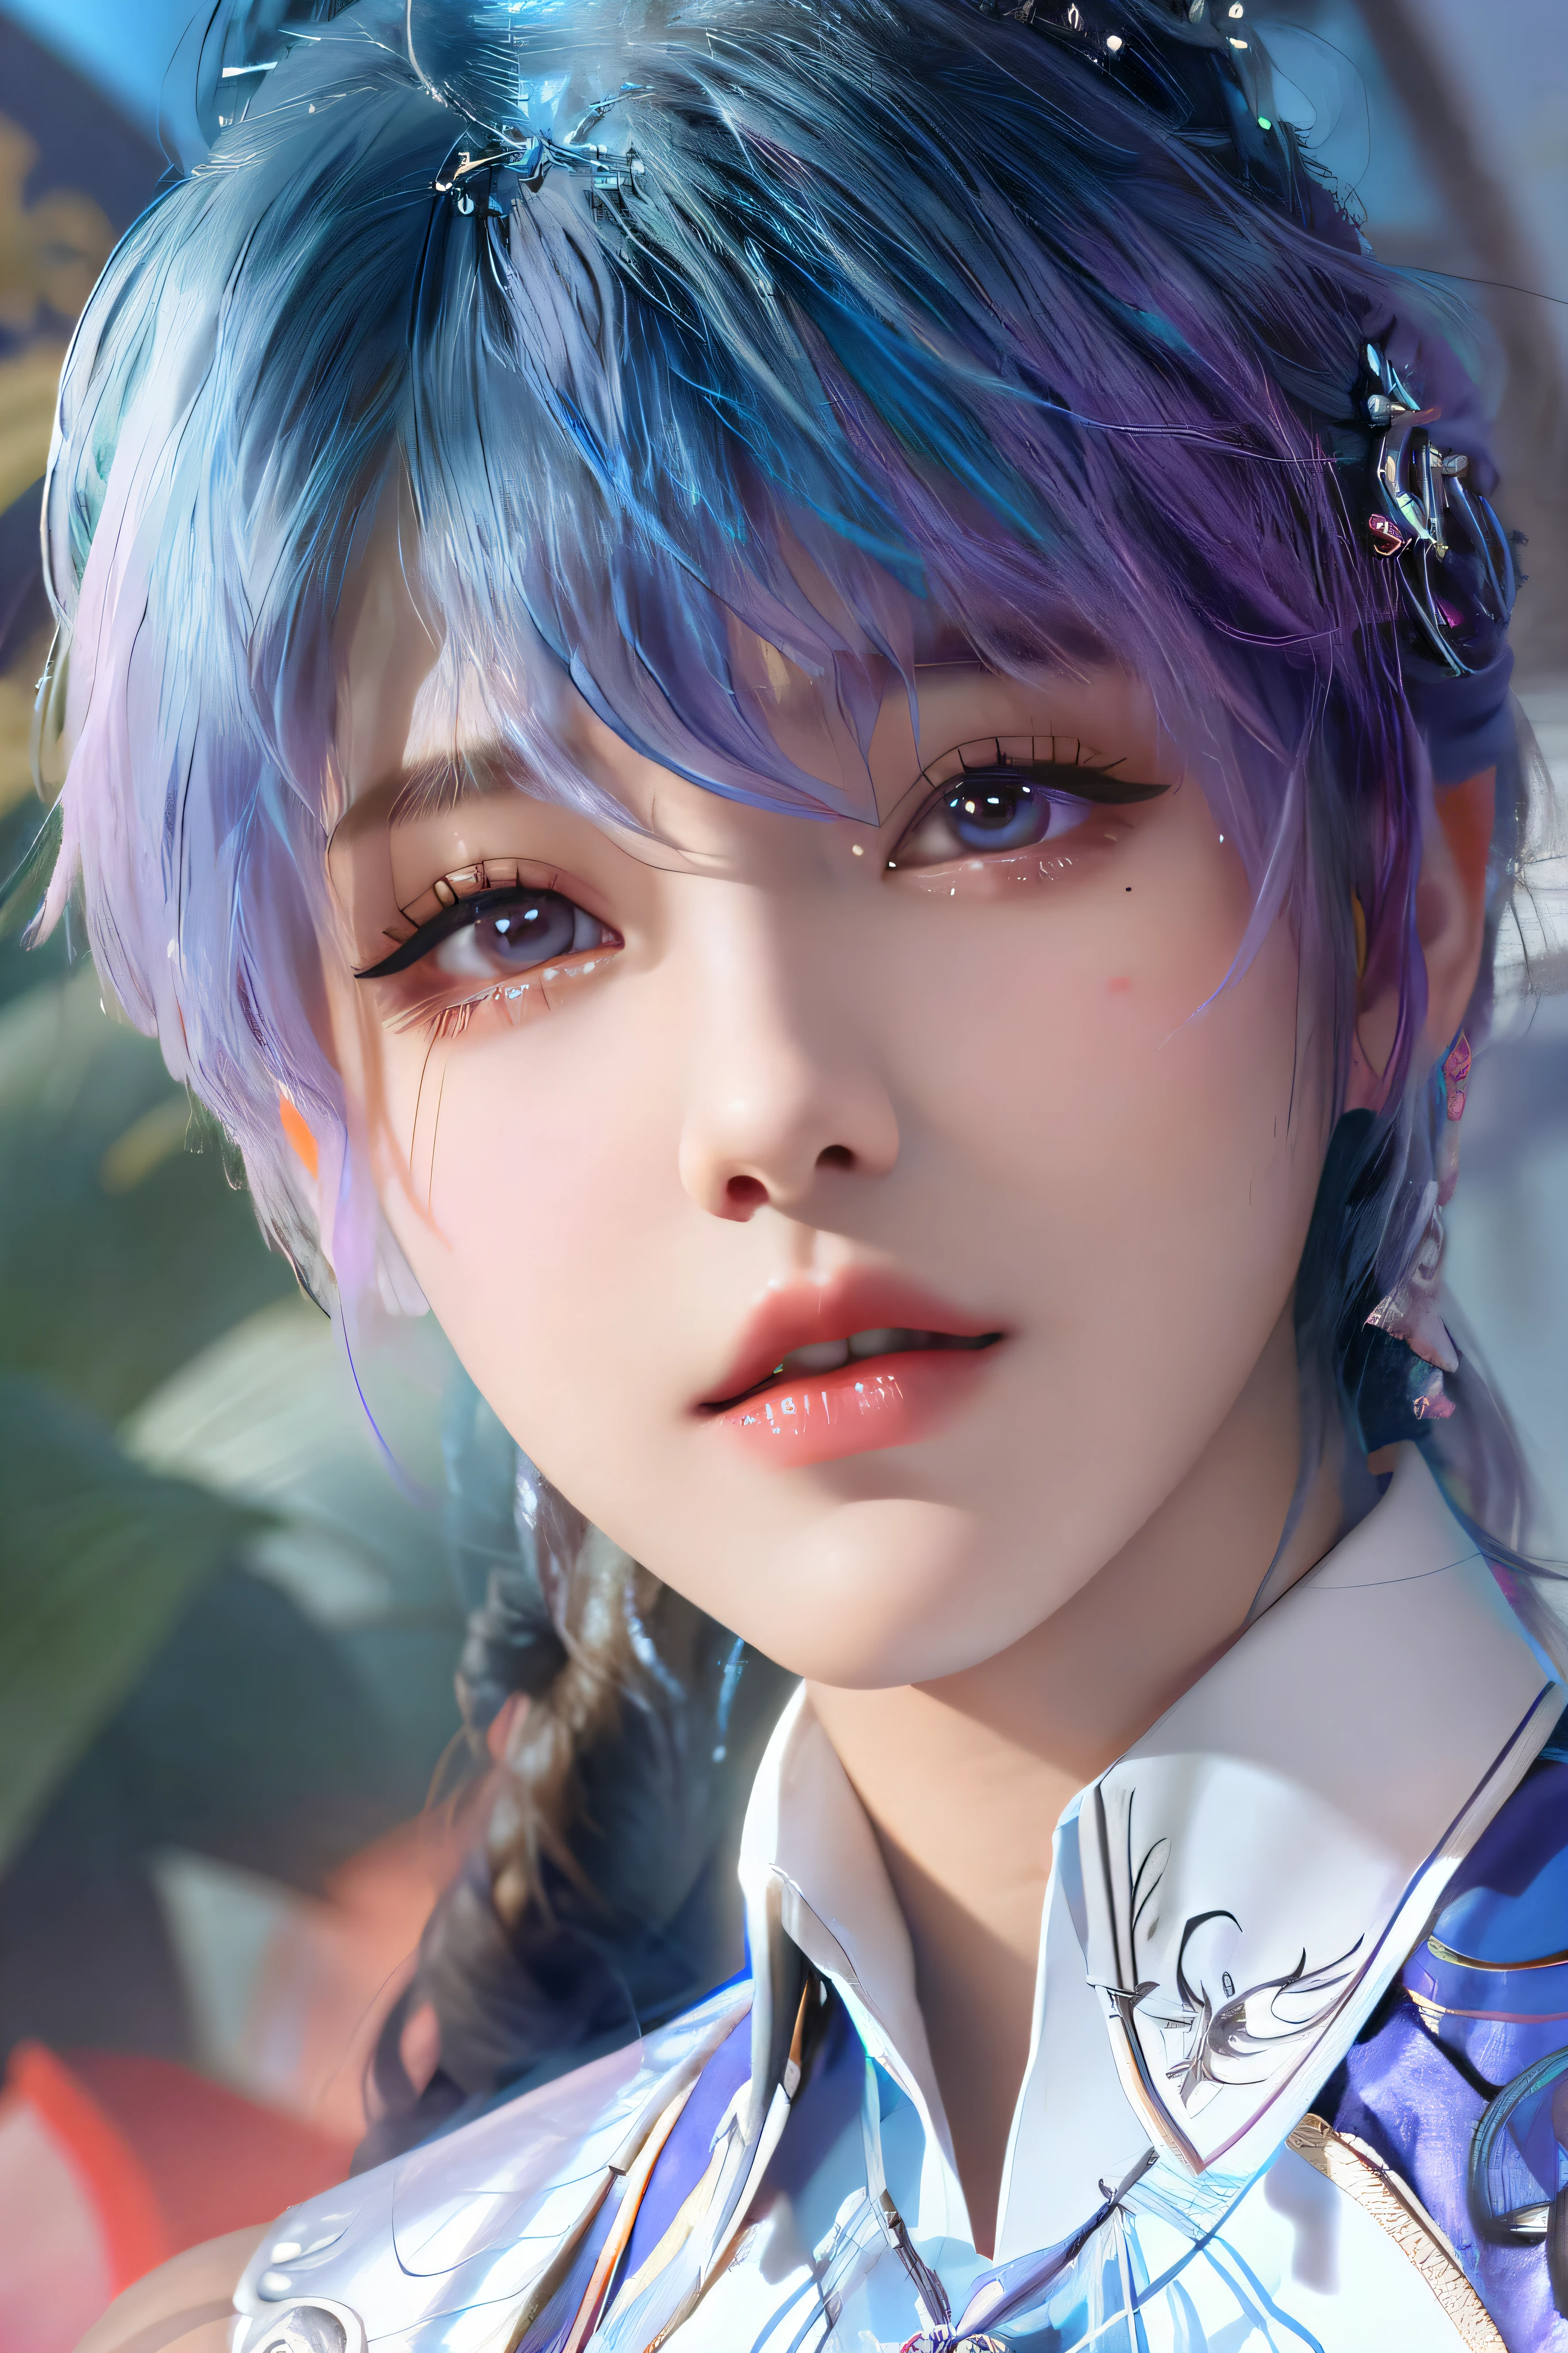 Close up of a woman with blue hair and purple shirt, Superb beauty，（（short detailed hair）），Portrait Chevaliers du Zodiaque Fille, zhongli from genshin impact, Keqing from Genshin Impact, Yun Ling, inspired by Leng Mei, Beautiful character painting, uma linda princesa， Exquisite princess, portrait of a female mage, Rendu portrait 8k